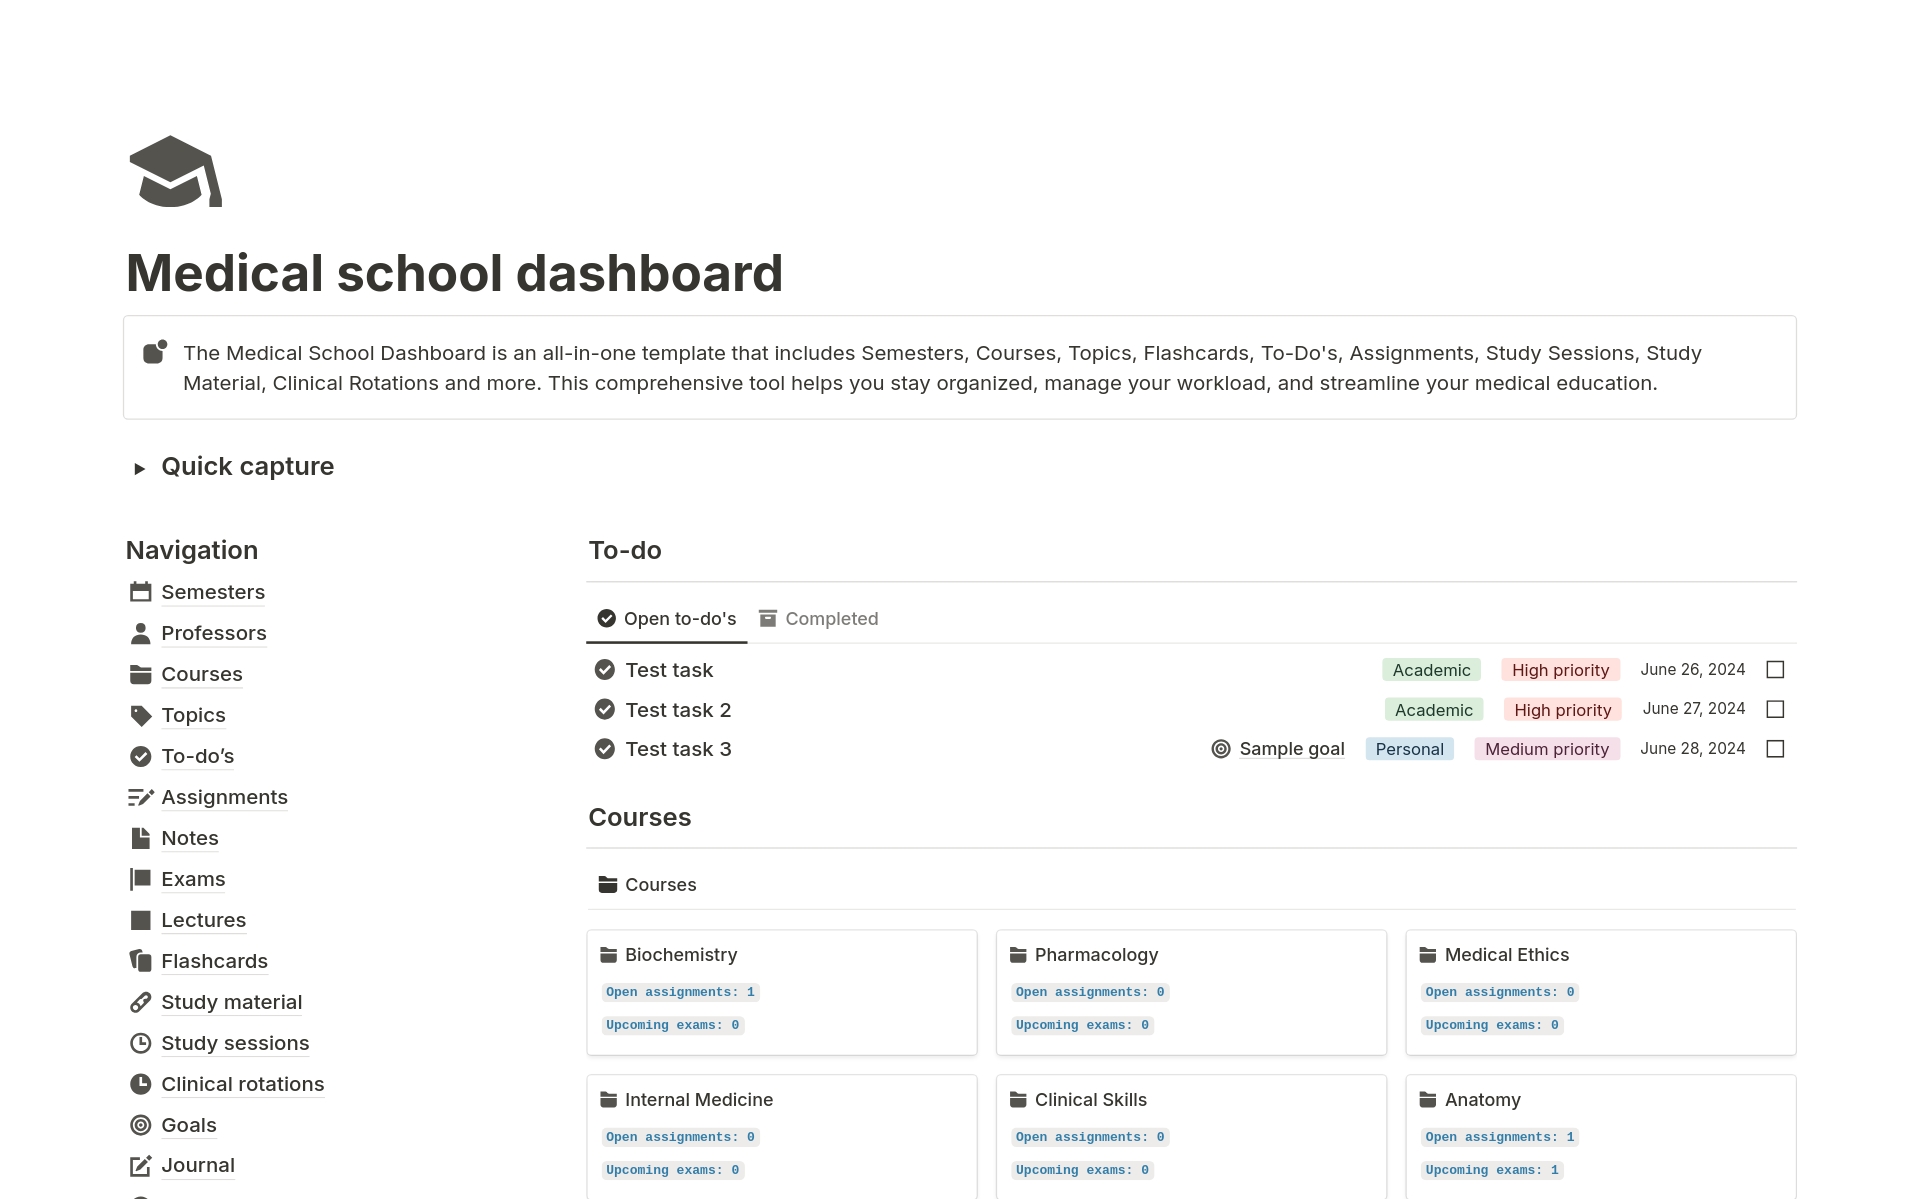 The Medical School Dashboard is an all-in-one template that includes Semesters, Courses, Topics, Flashcards, To-Do's, Assignments, Study Sessions, Study Material, Clinical Rotations and more. 